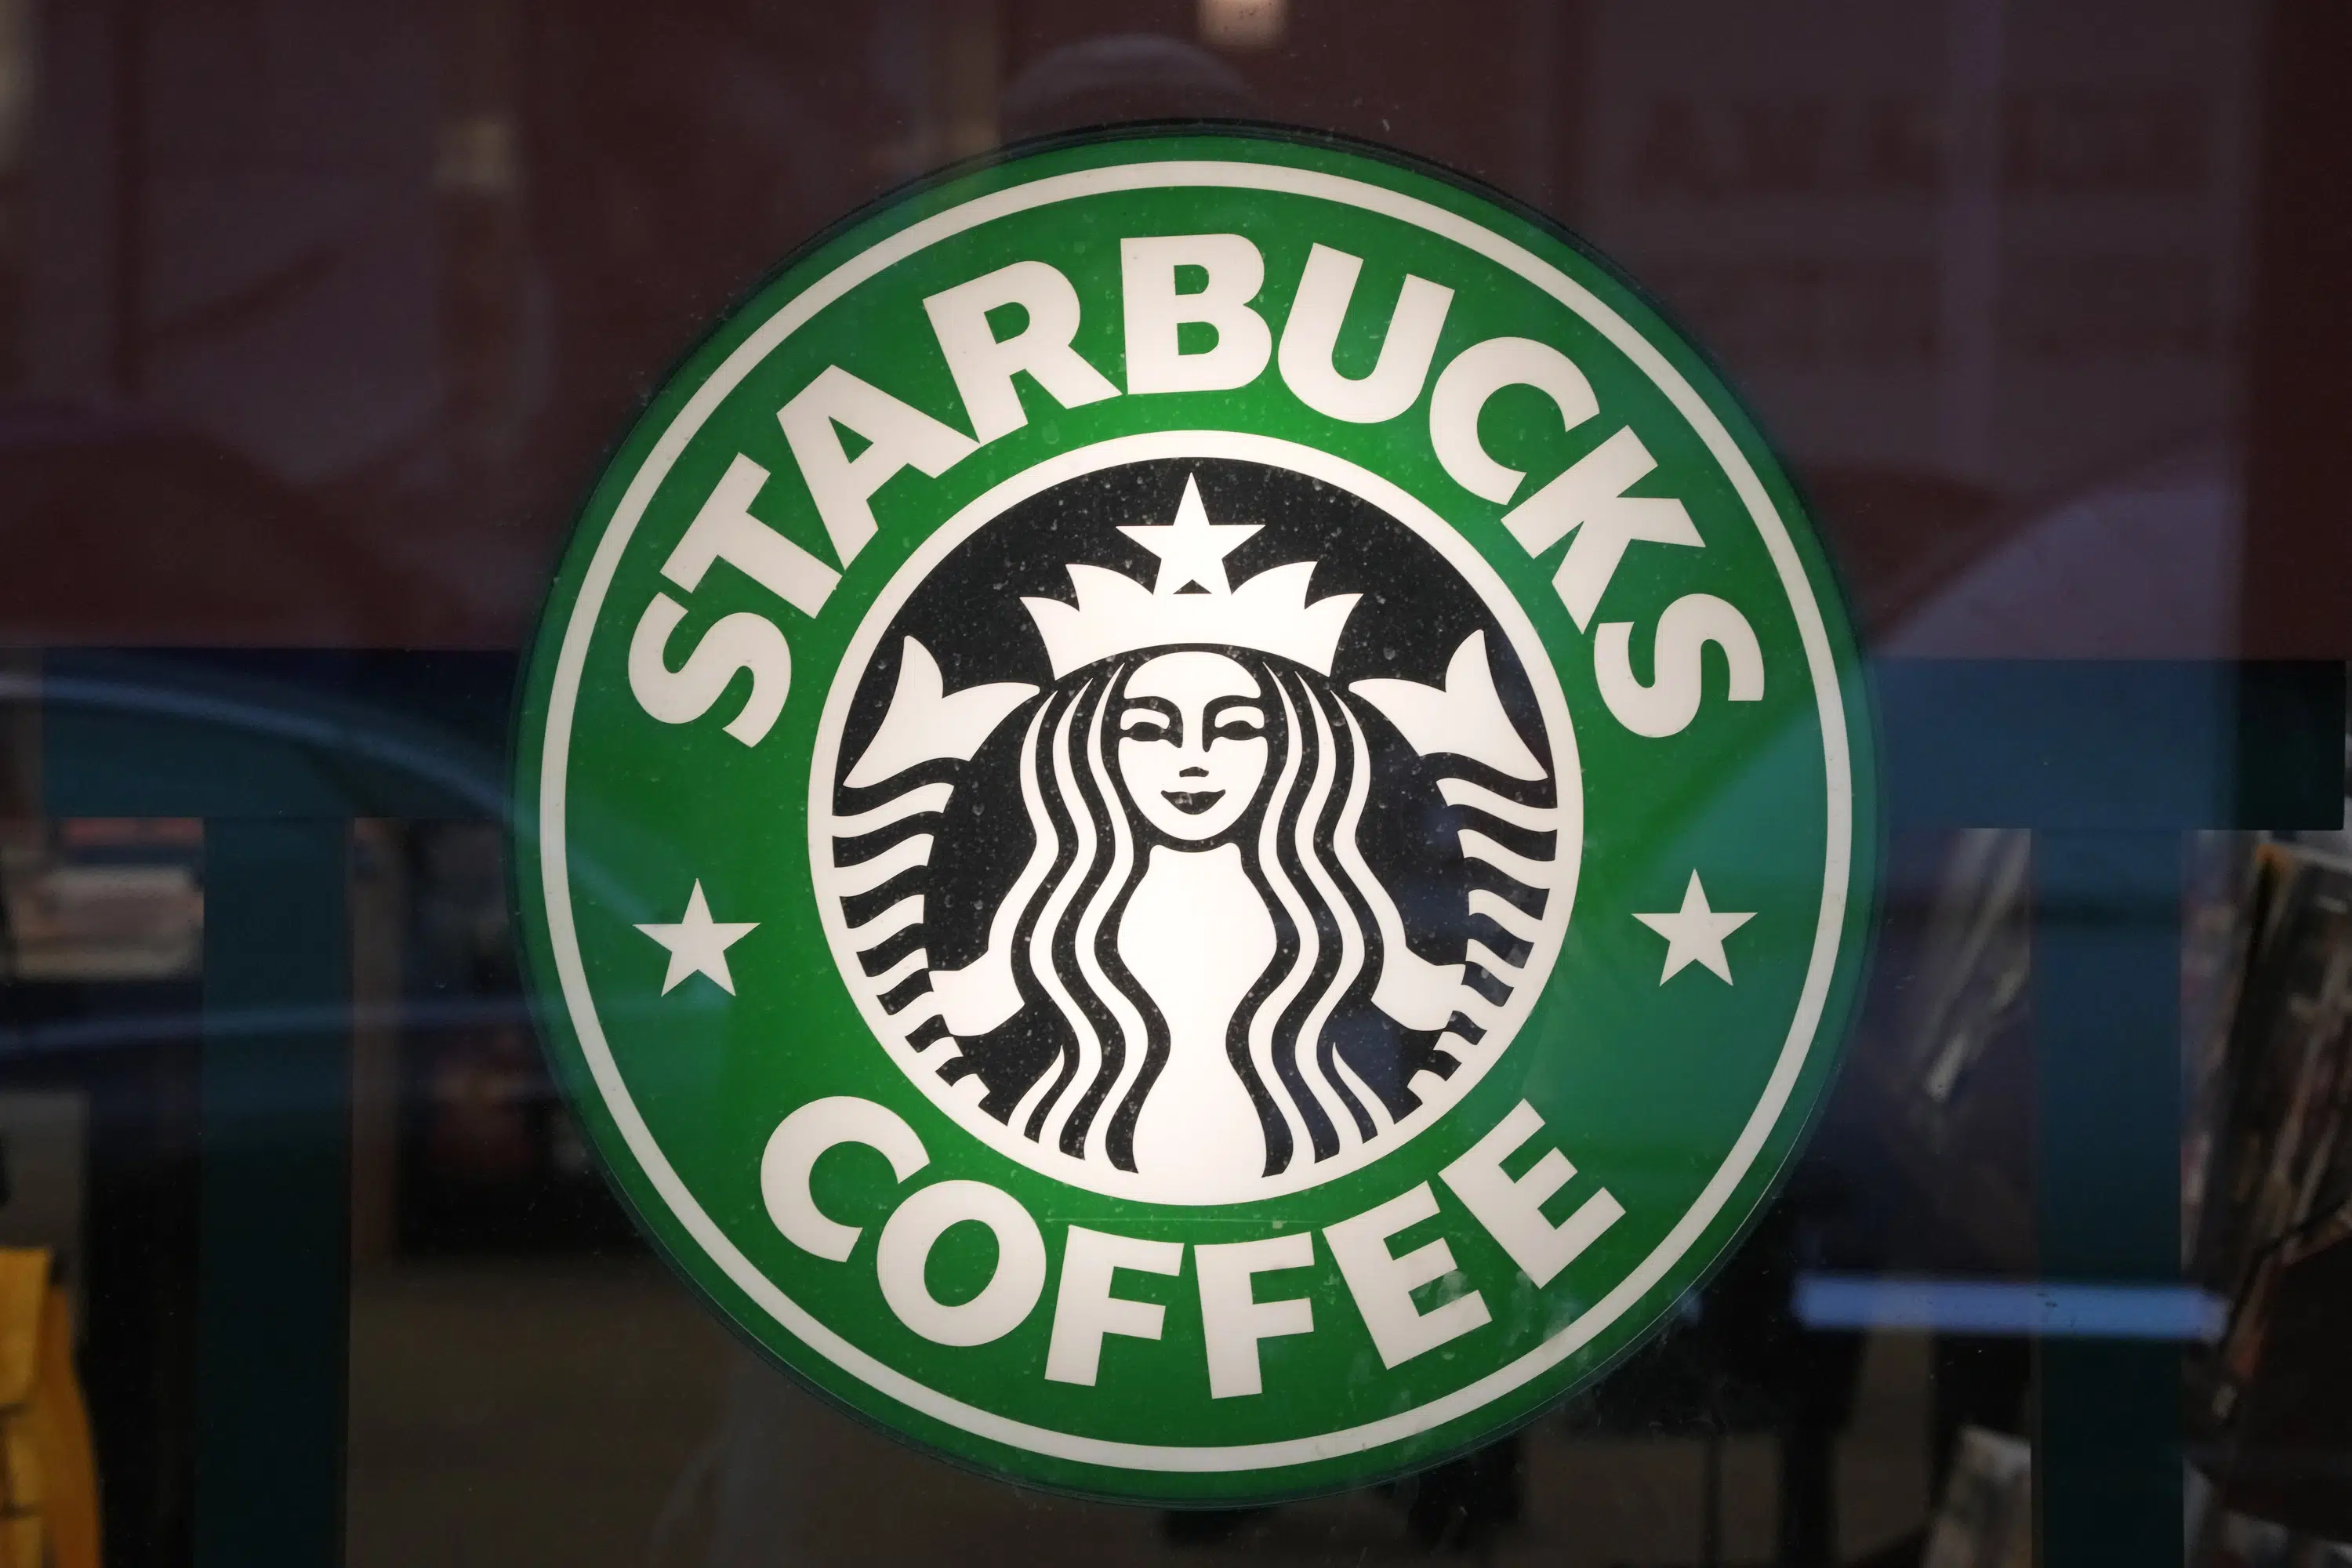 A jury has awarded $25.6 million to a white Starbucks manager who was fired after two black men were arrested.